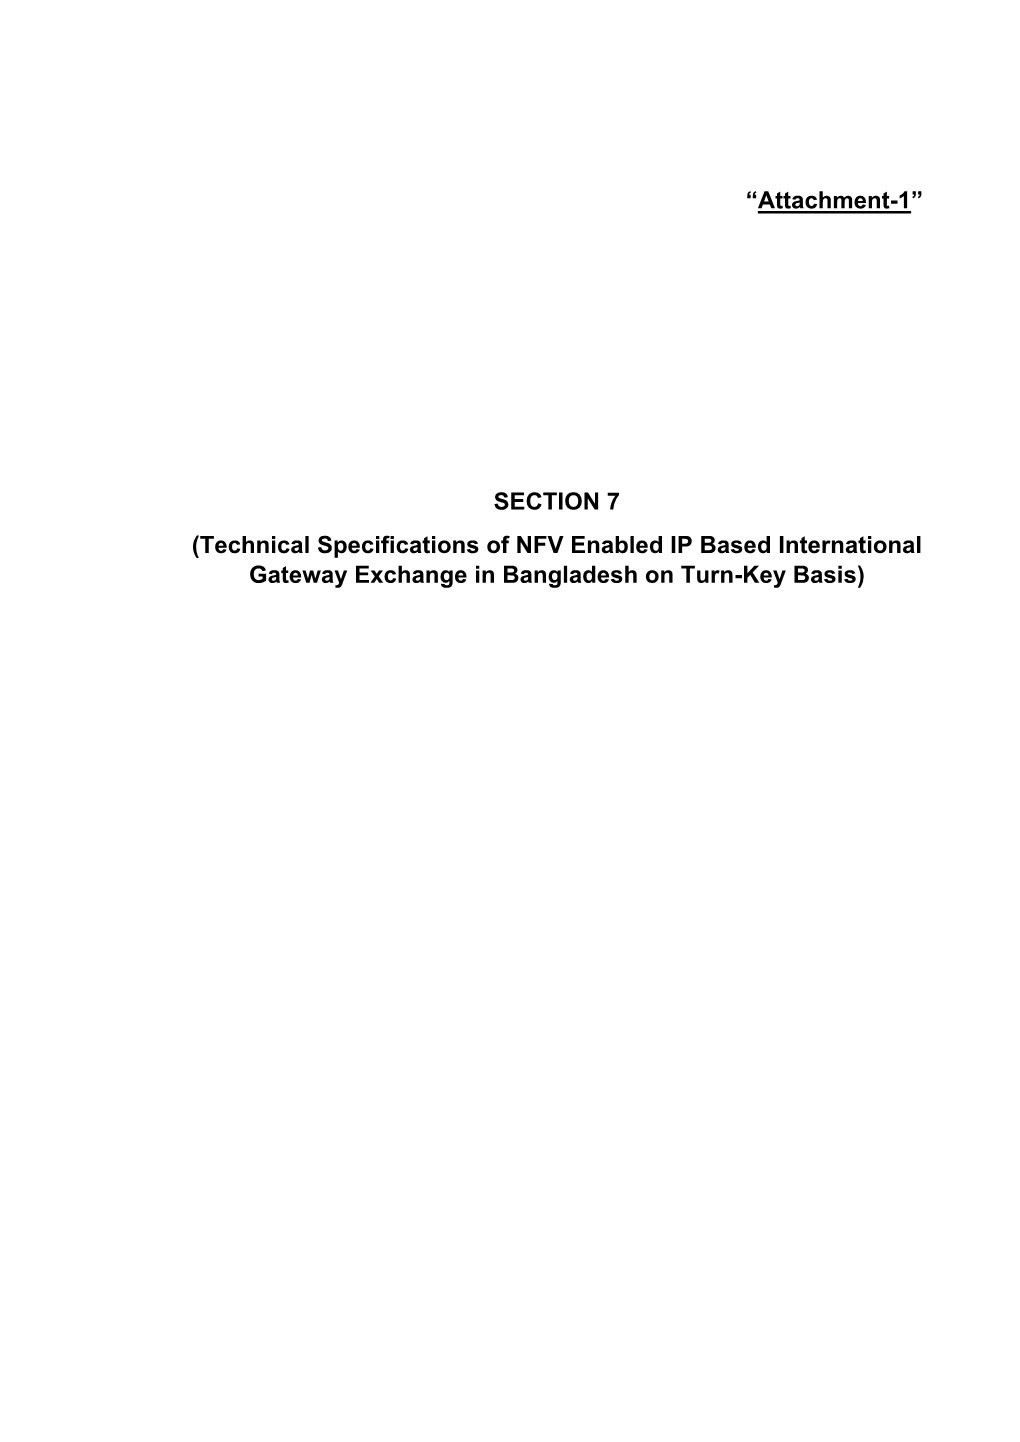 “Attachment-1” SECTION 7 (Technical Specifications of NFV Enabled IP